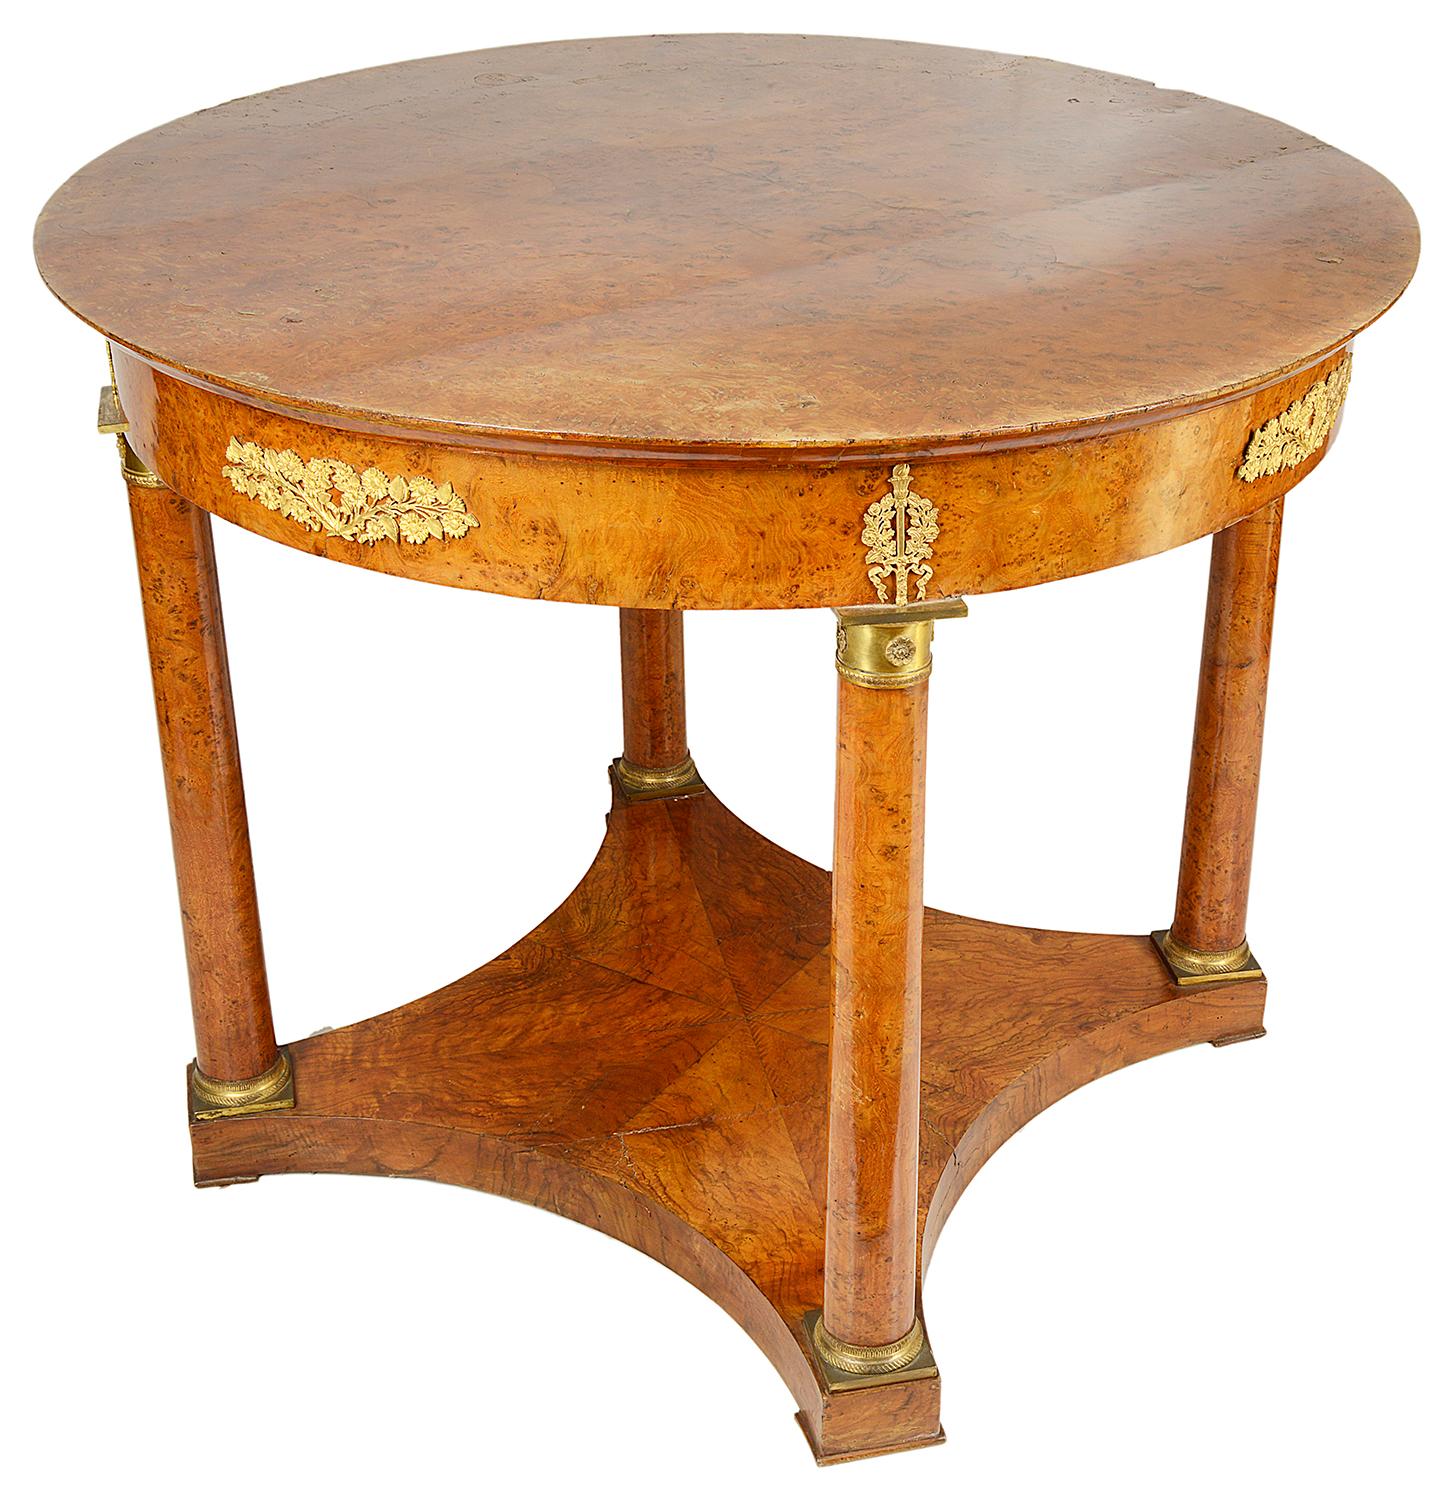 A good quality 19th century burr walnut French Empire influenced gueridon / centre table. Having classical gilded ormolu mounts to the frieze and capitals to the four circular supports that are united by a platform base.